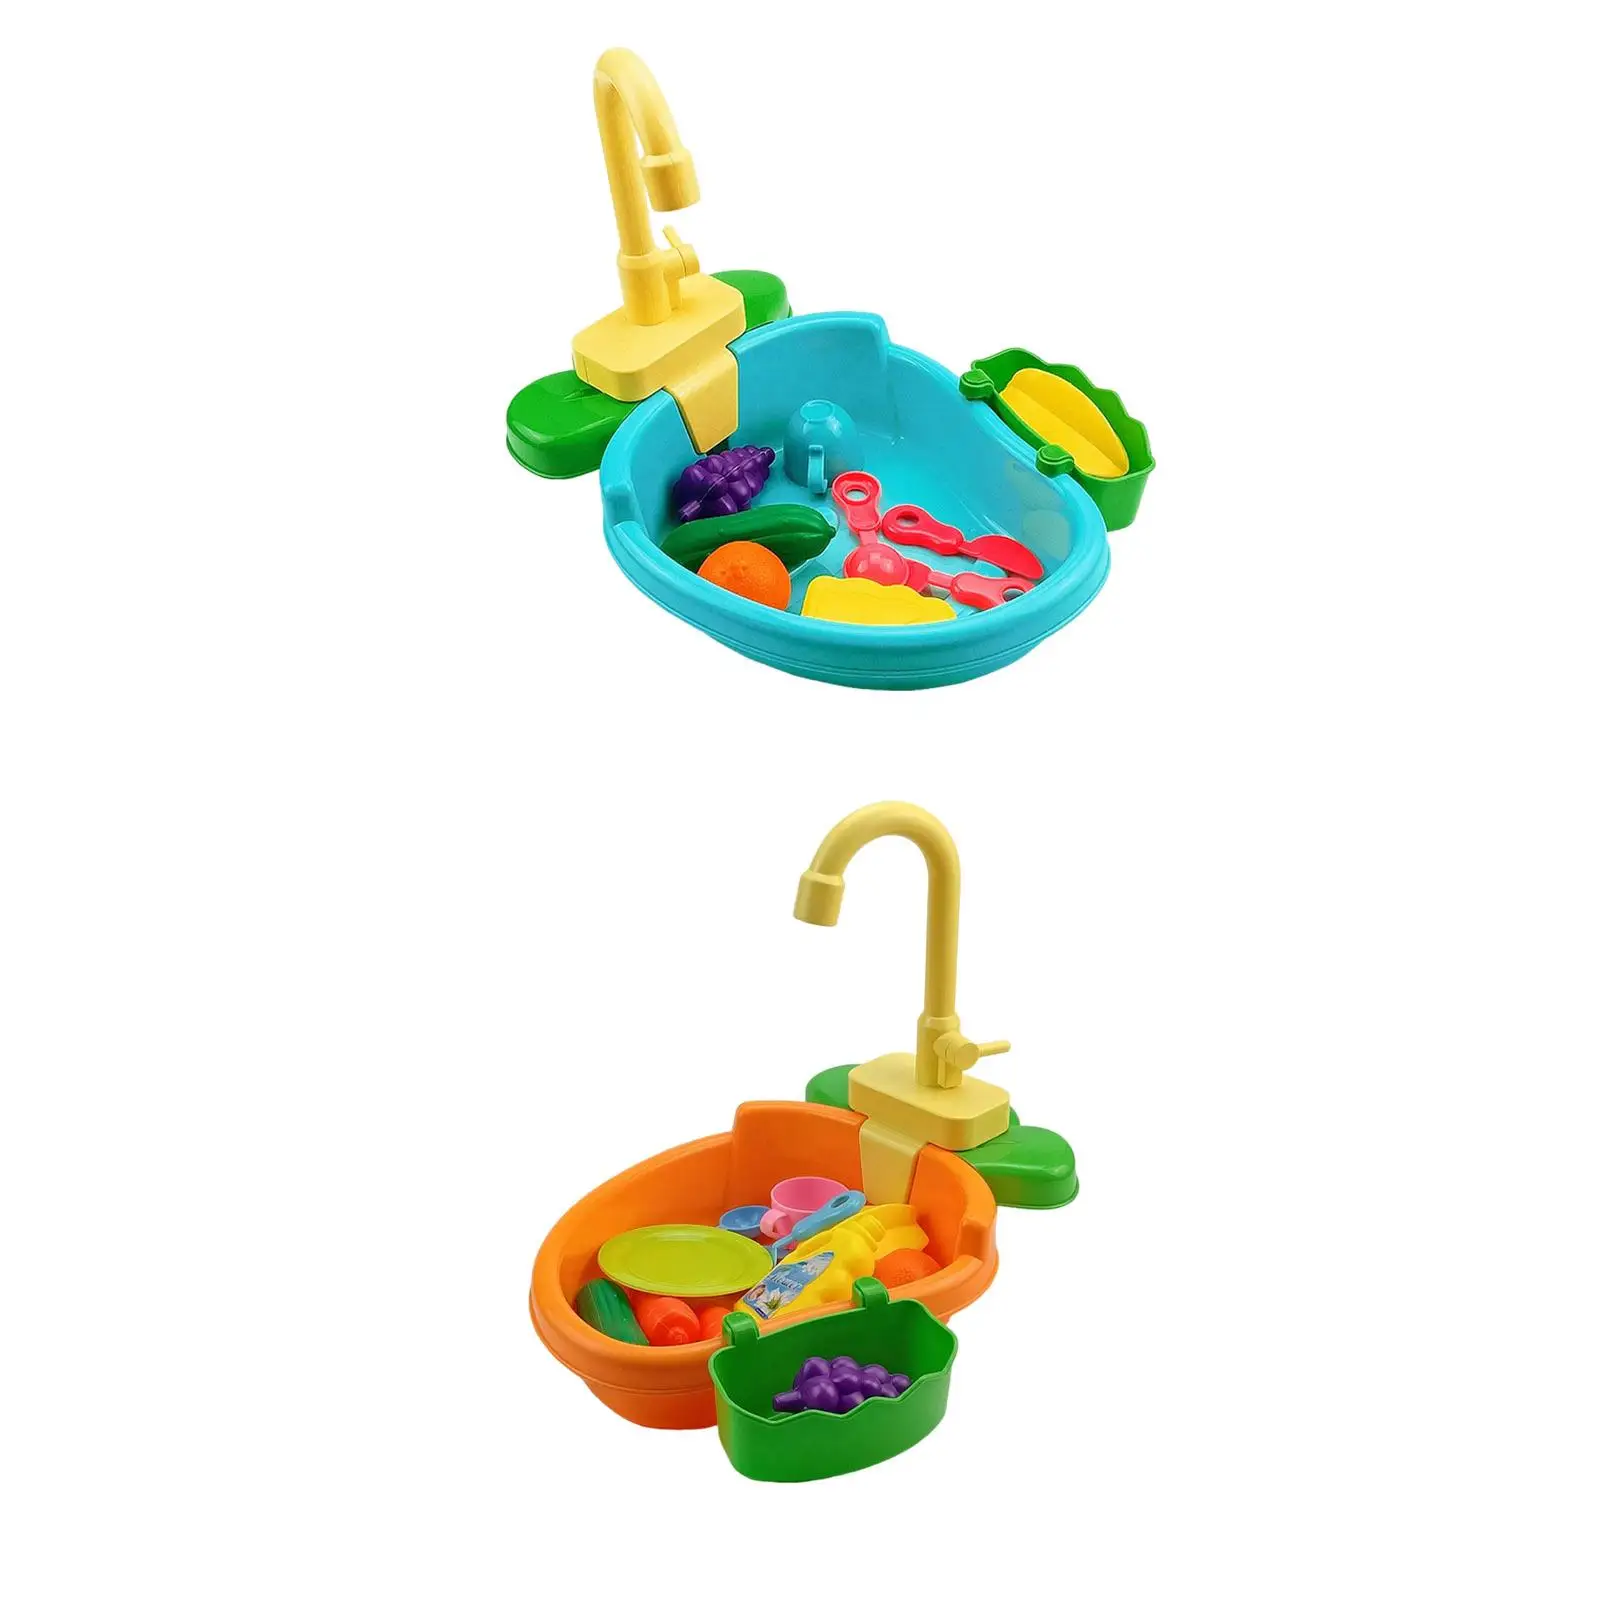 Play Sink Toy with Running Montessori Toy Playing Role Dishes Working Faucet Faucet Play Dishes Kid Childern